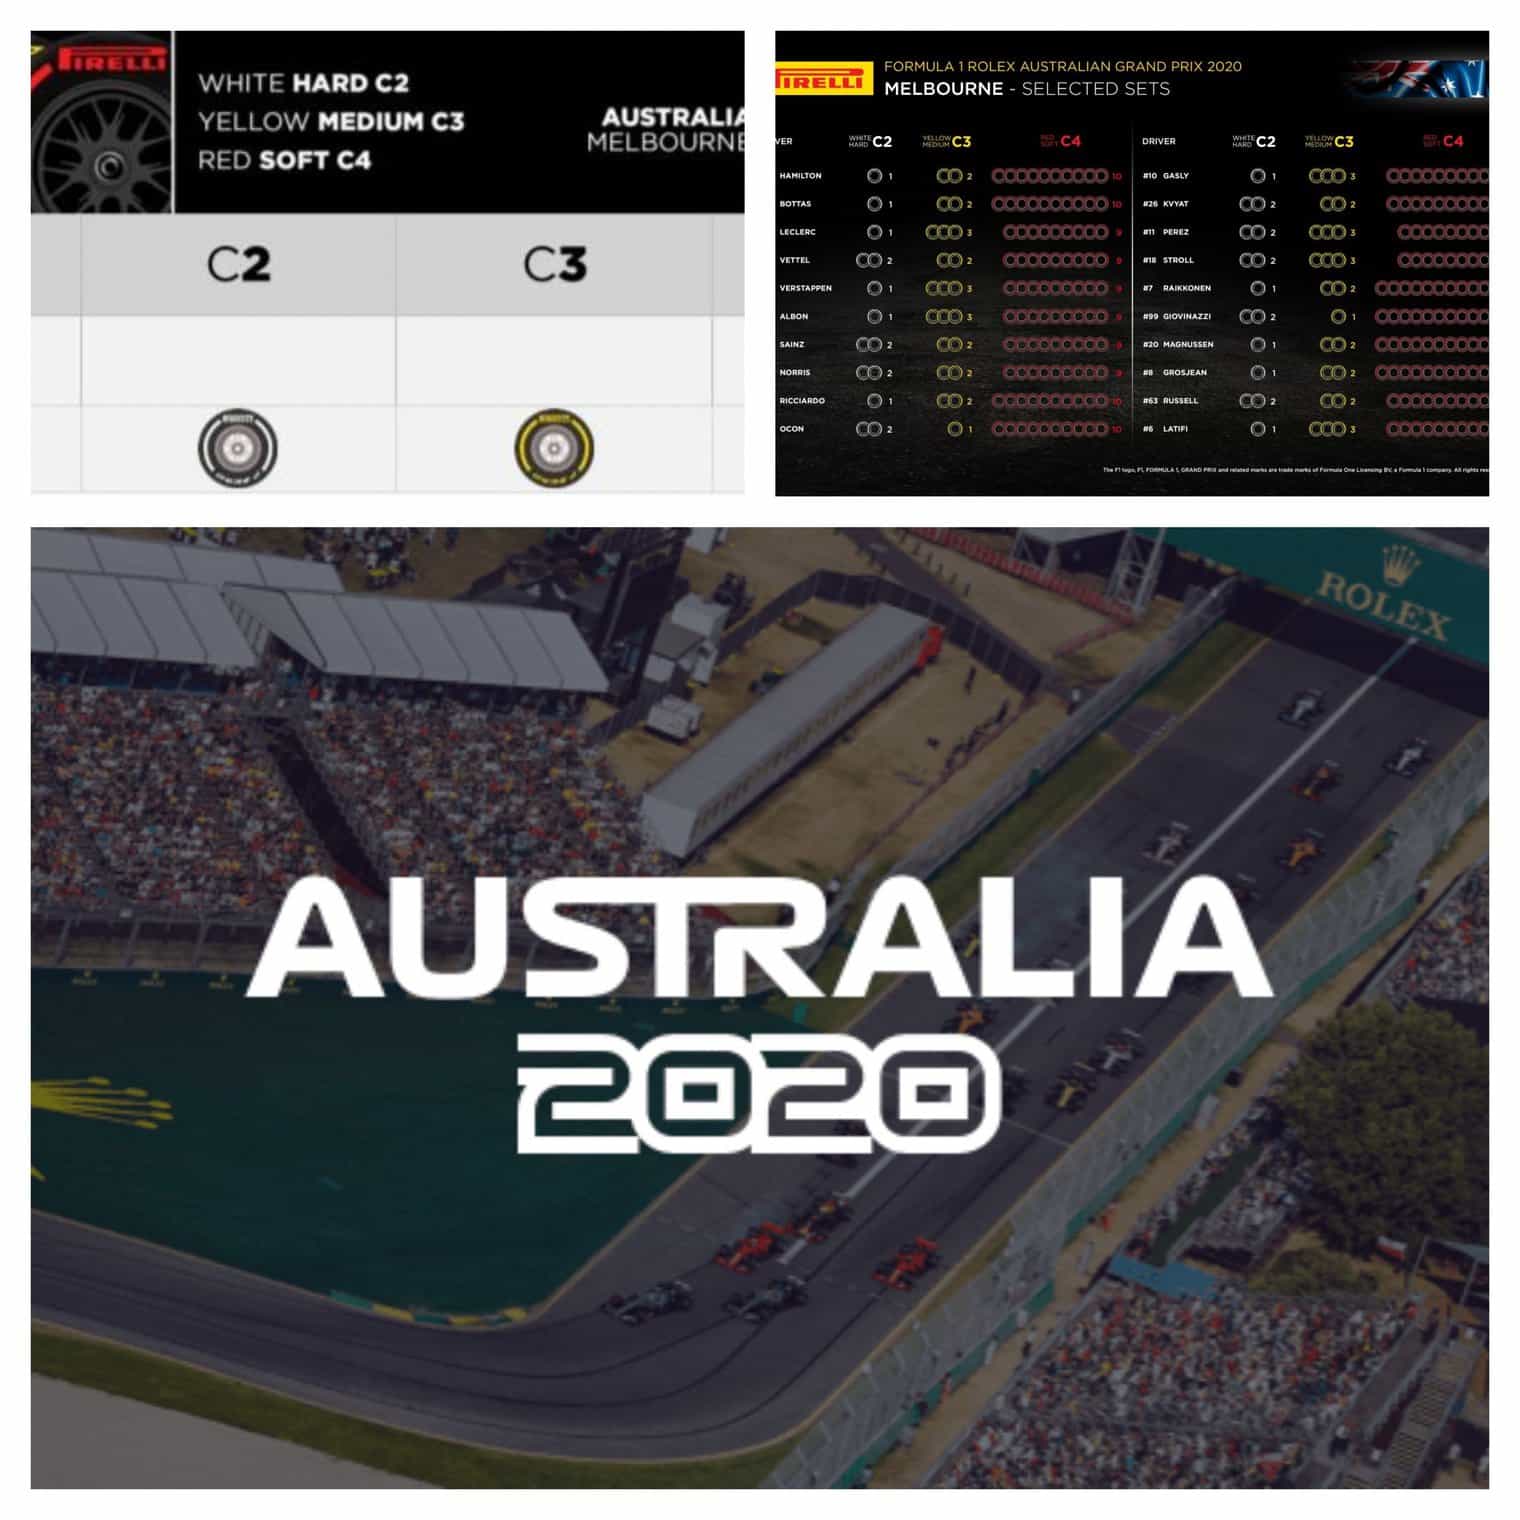 On the Way to Australia GP 2020: F1 Technical preview